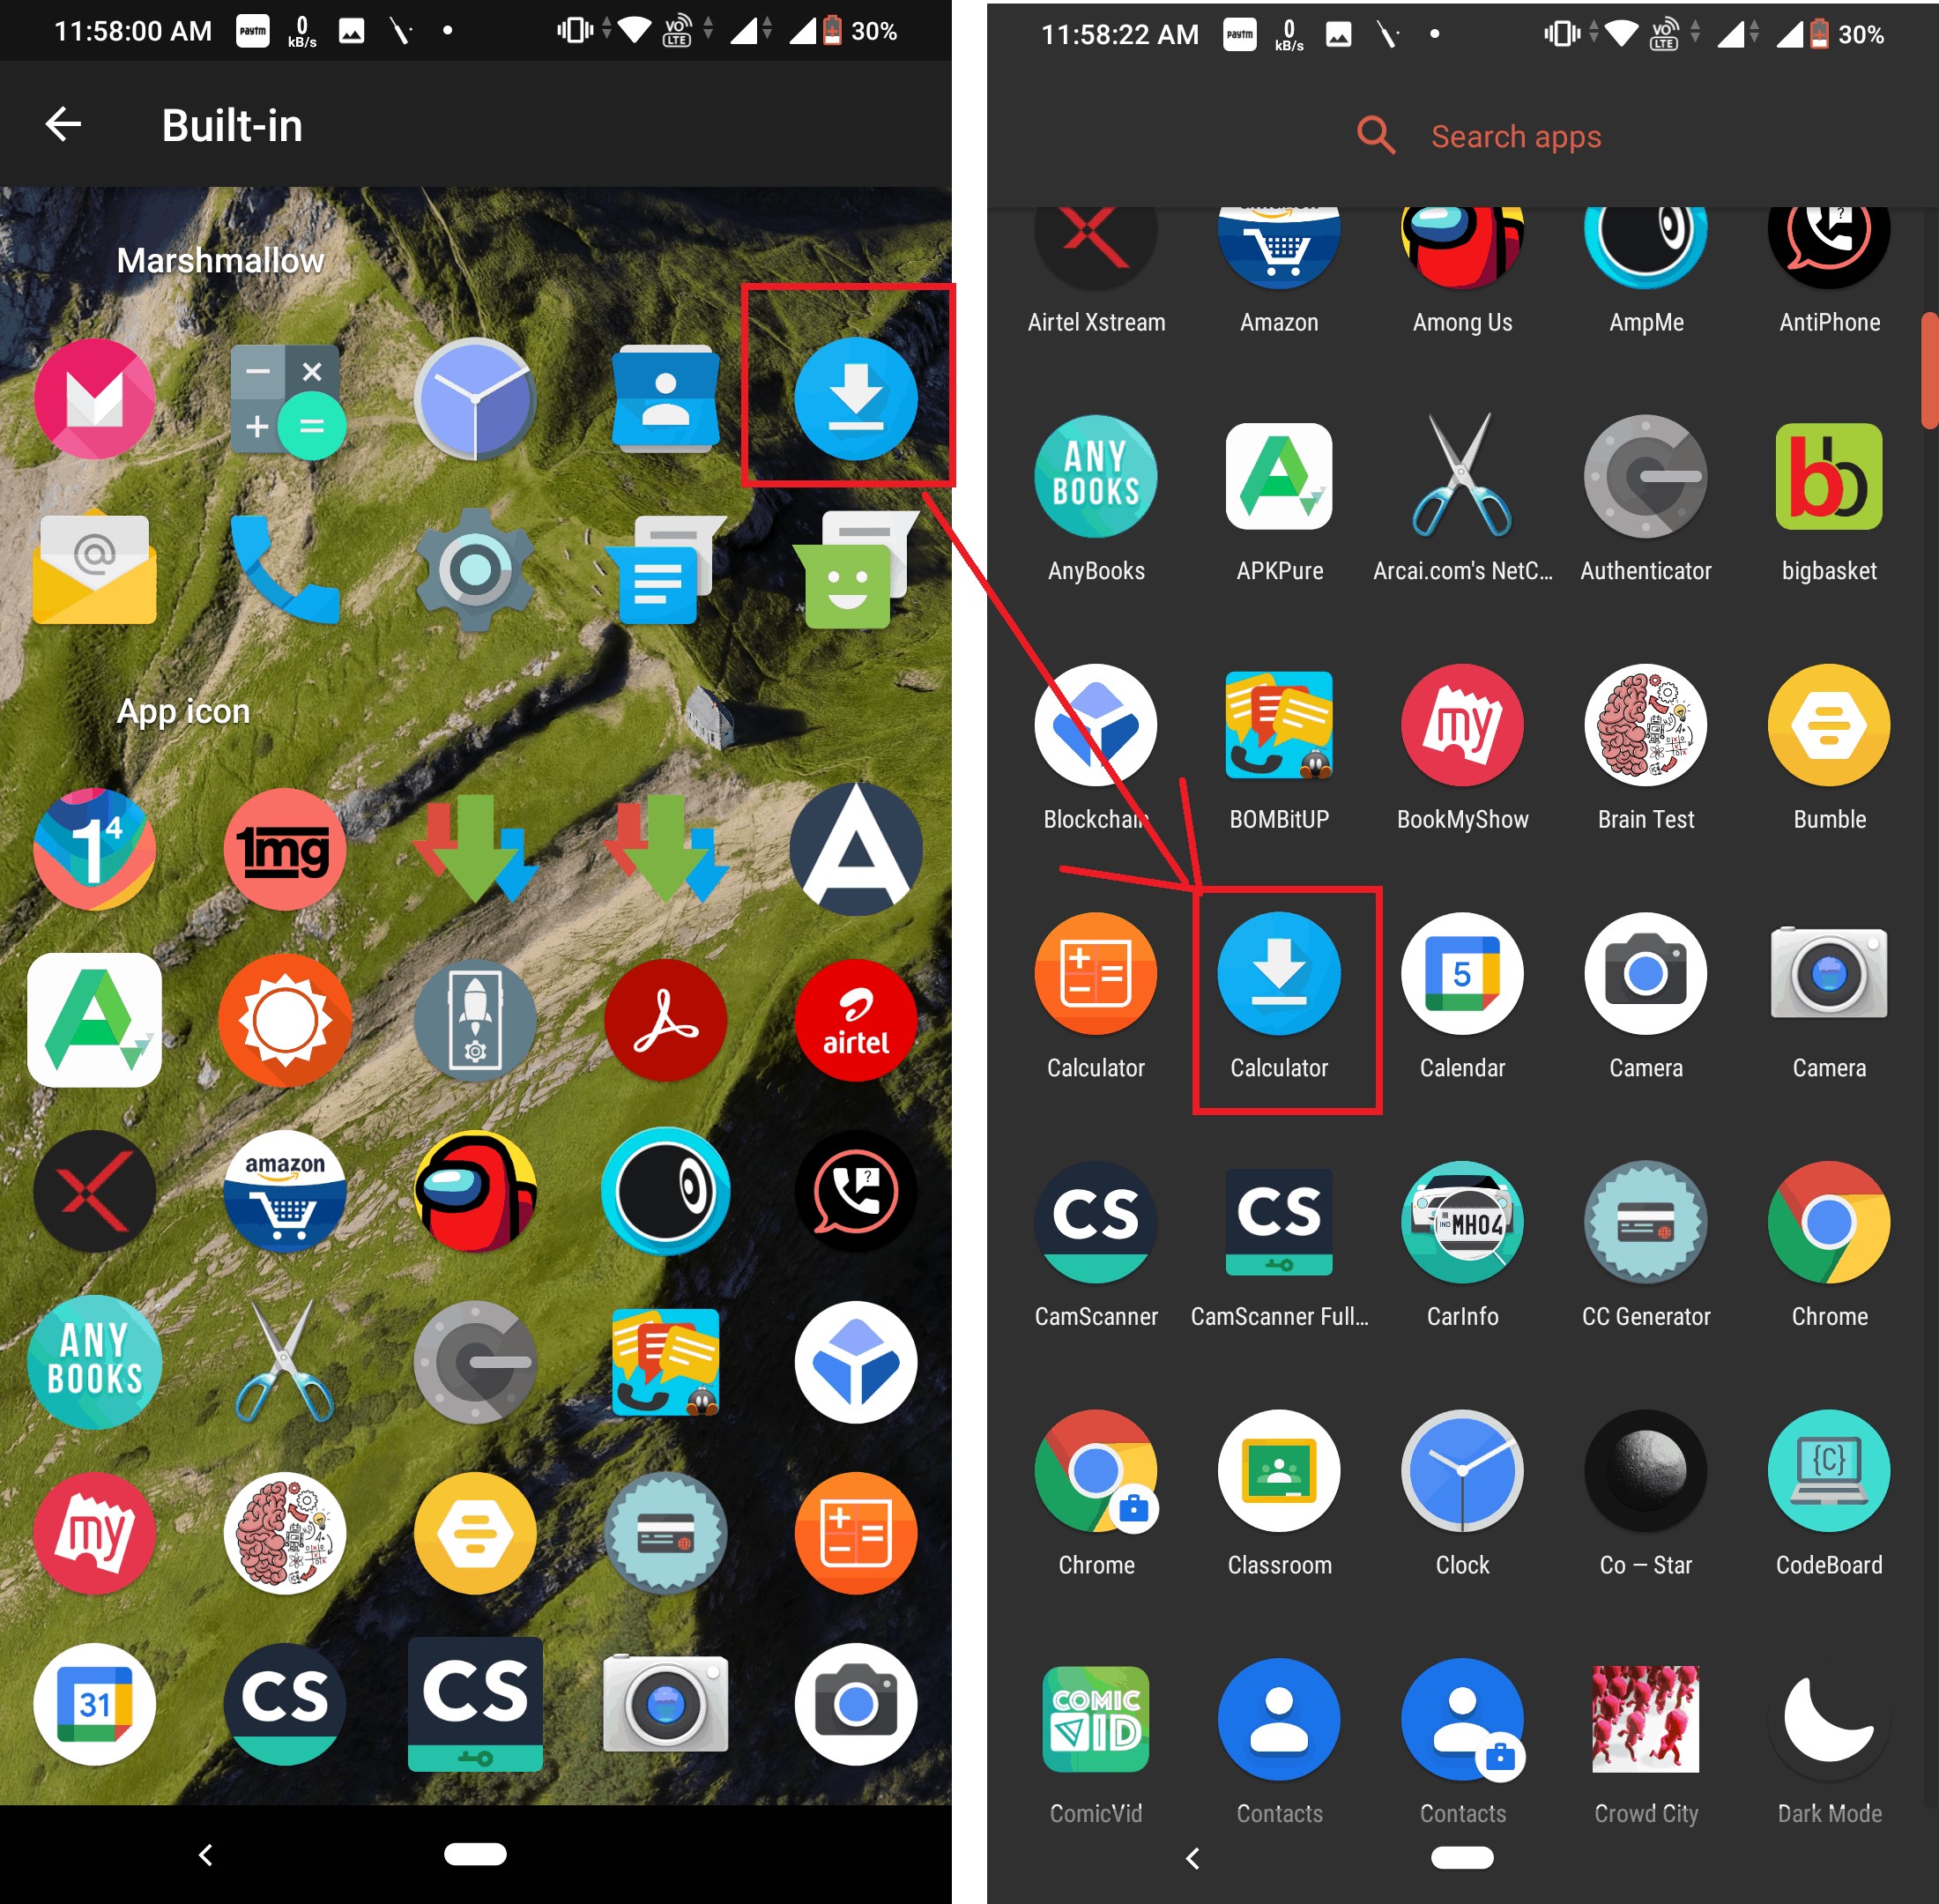 Hide apps on any android device using Nova Launcher free version